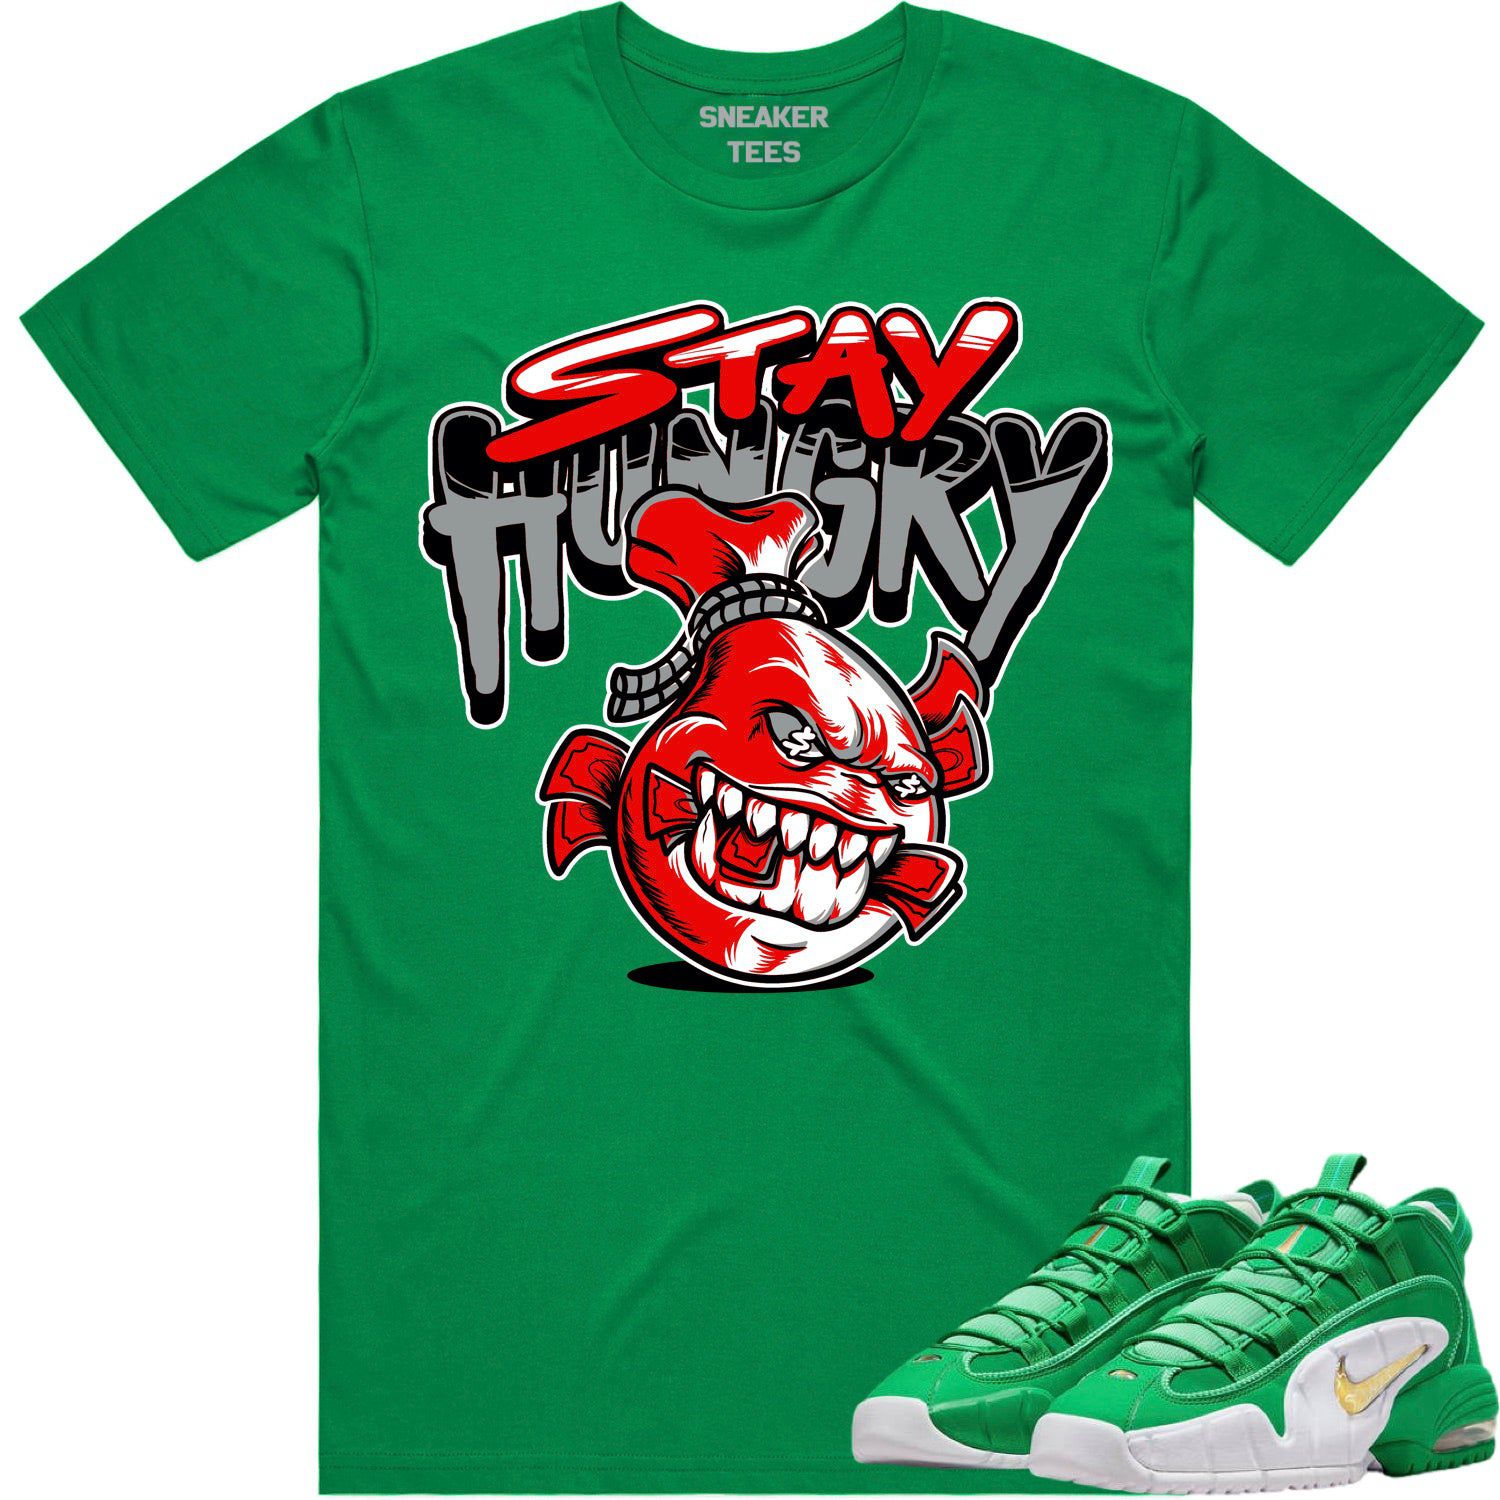 Penny 1 Stadium Green 1s Shirt - Sneaker Tees - Stay Hungry